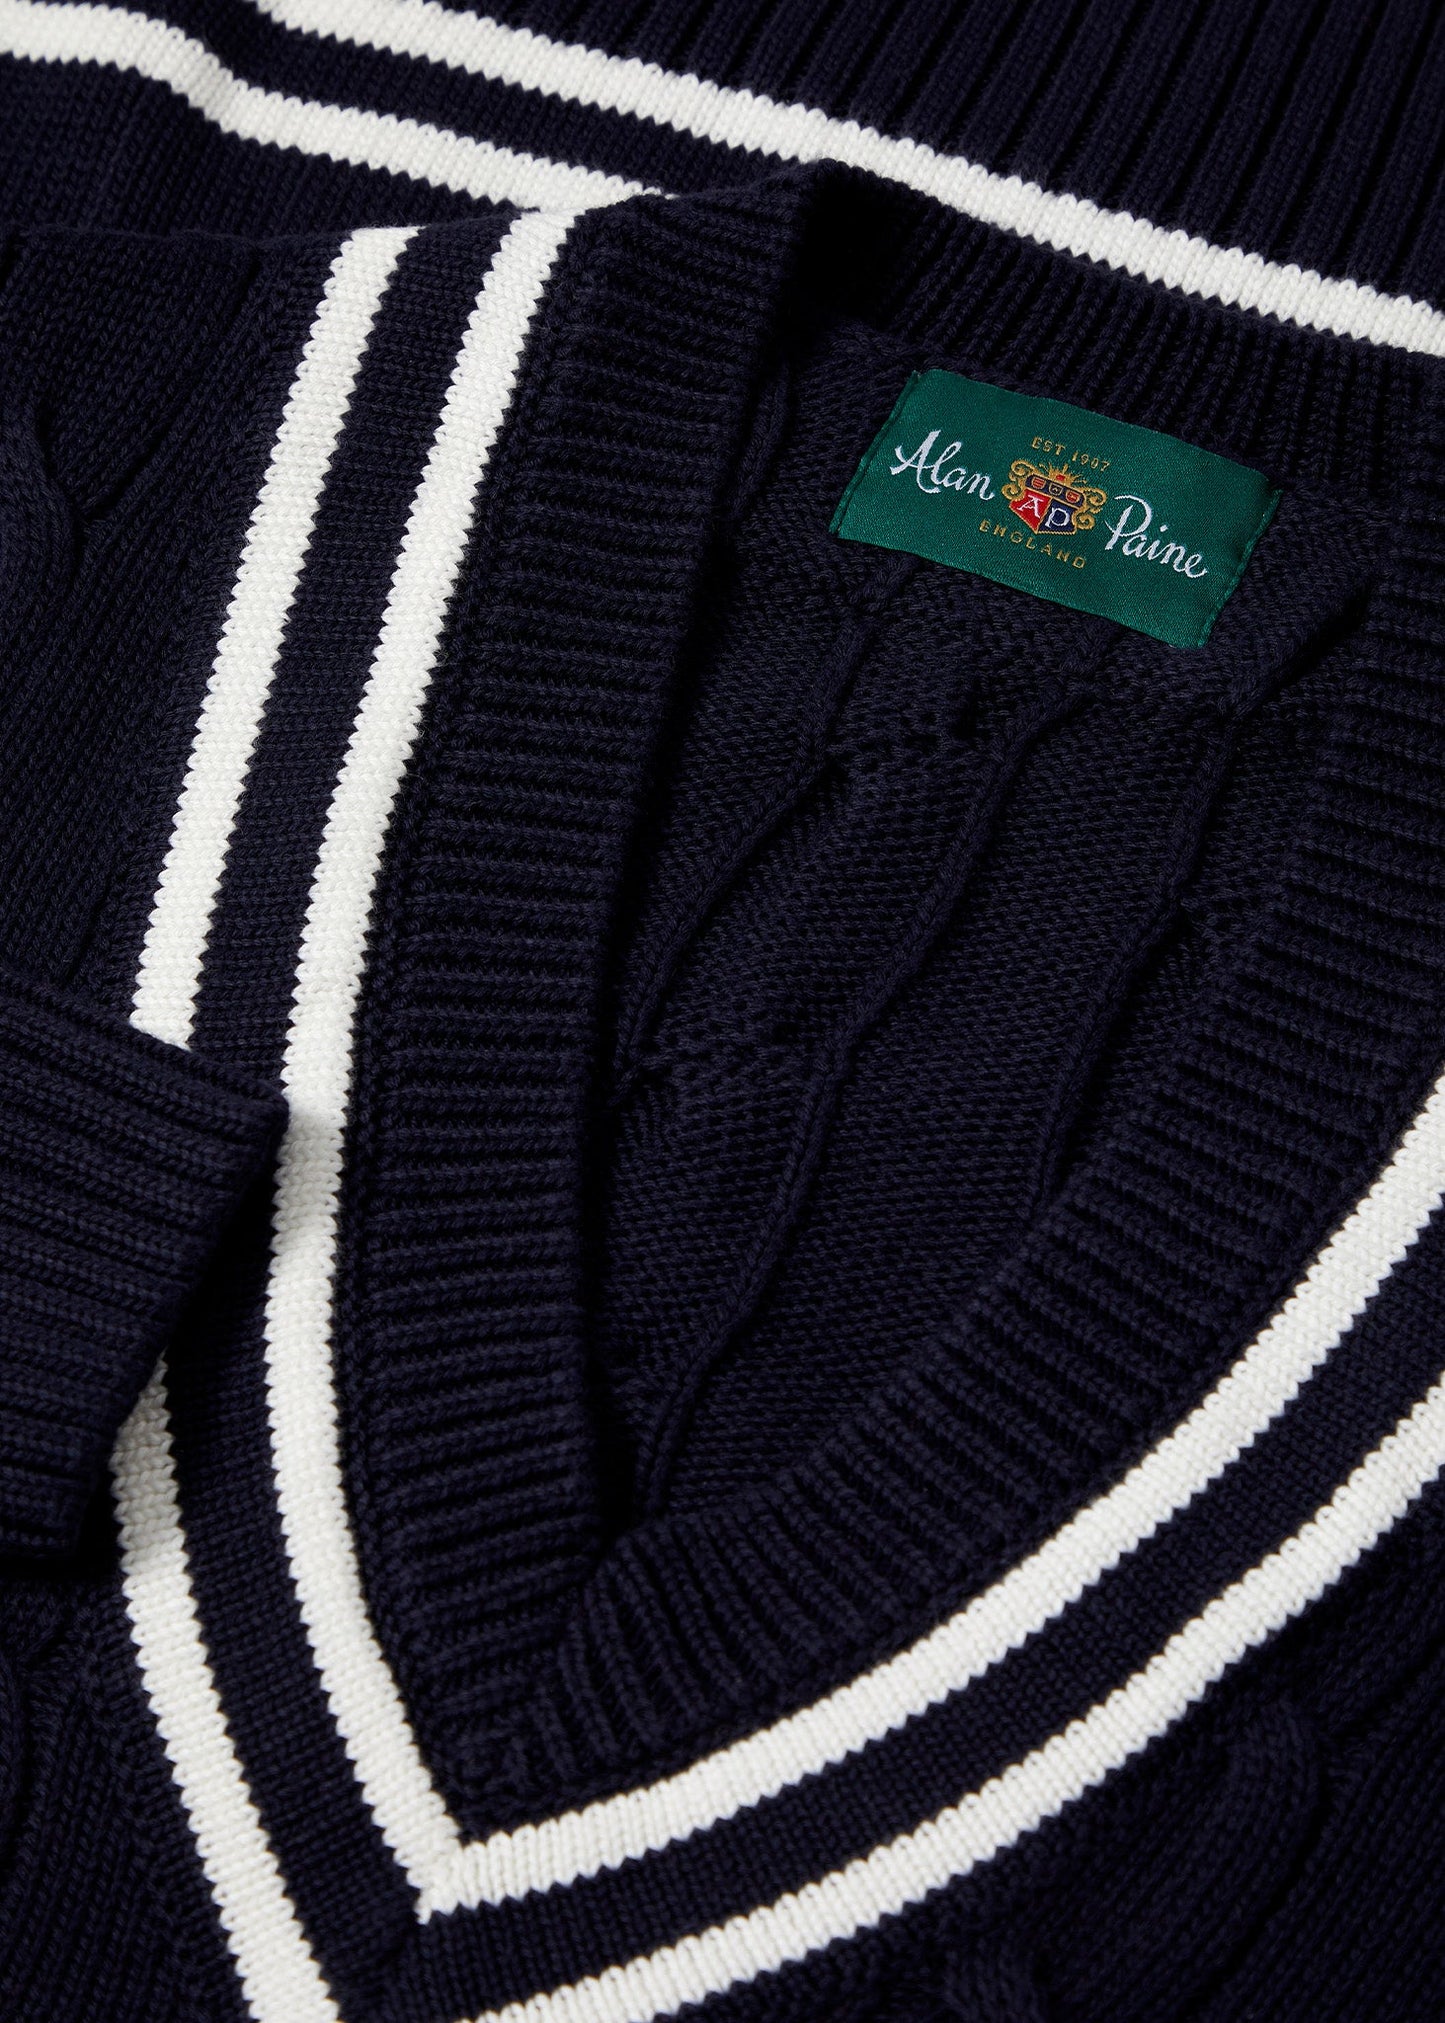 dark navy cable knit cricket jumper with vee neck.